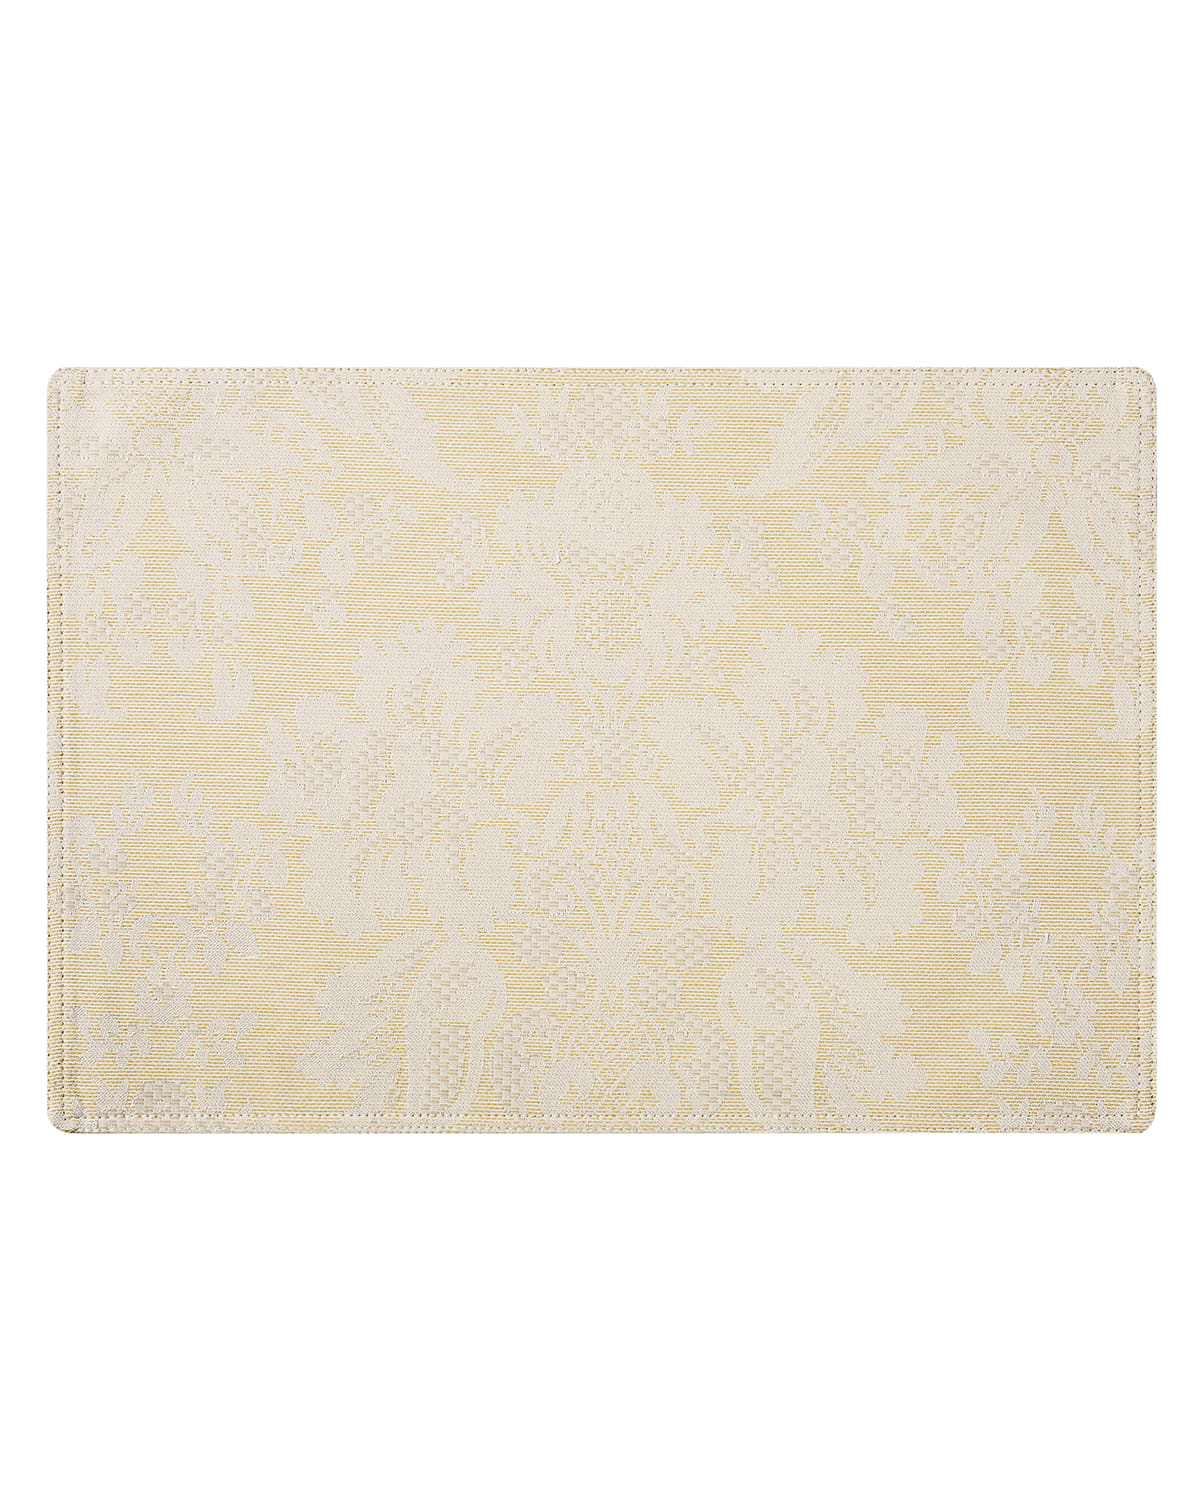 Image Waterford Berrigan Placemats, Set of 4